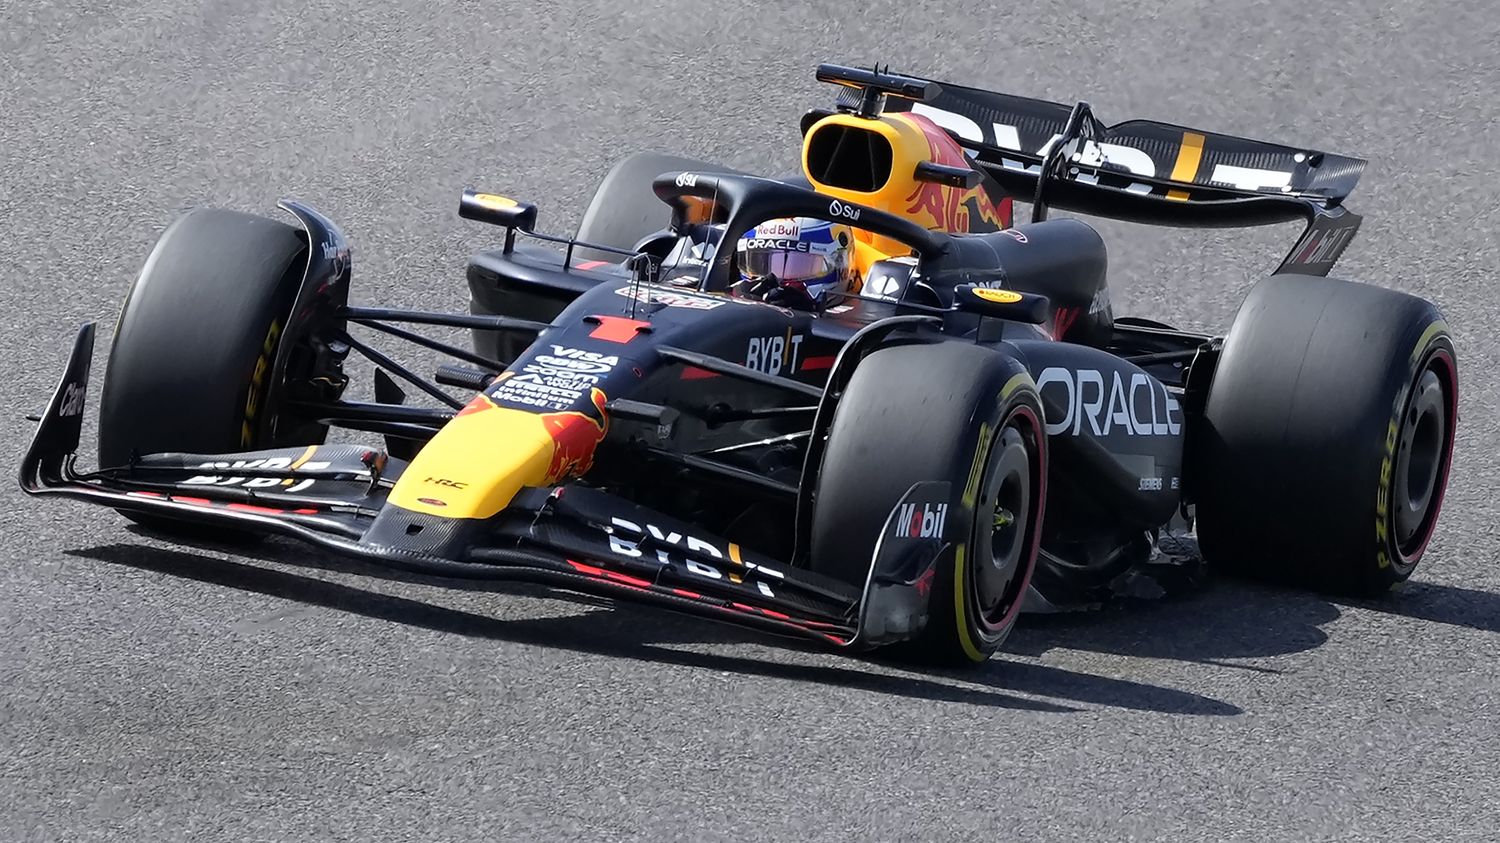 F1: Max Verstappen flies over the Japanese Grand Prix and regains victory